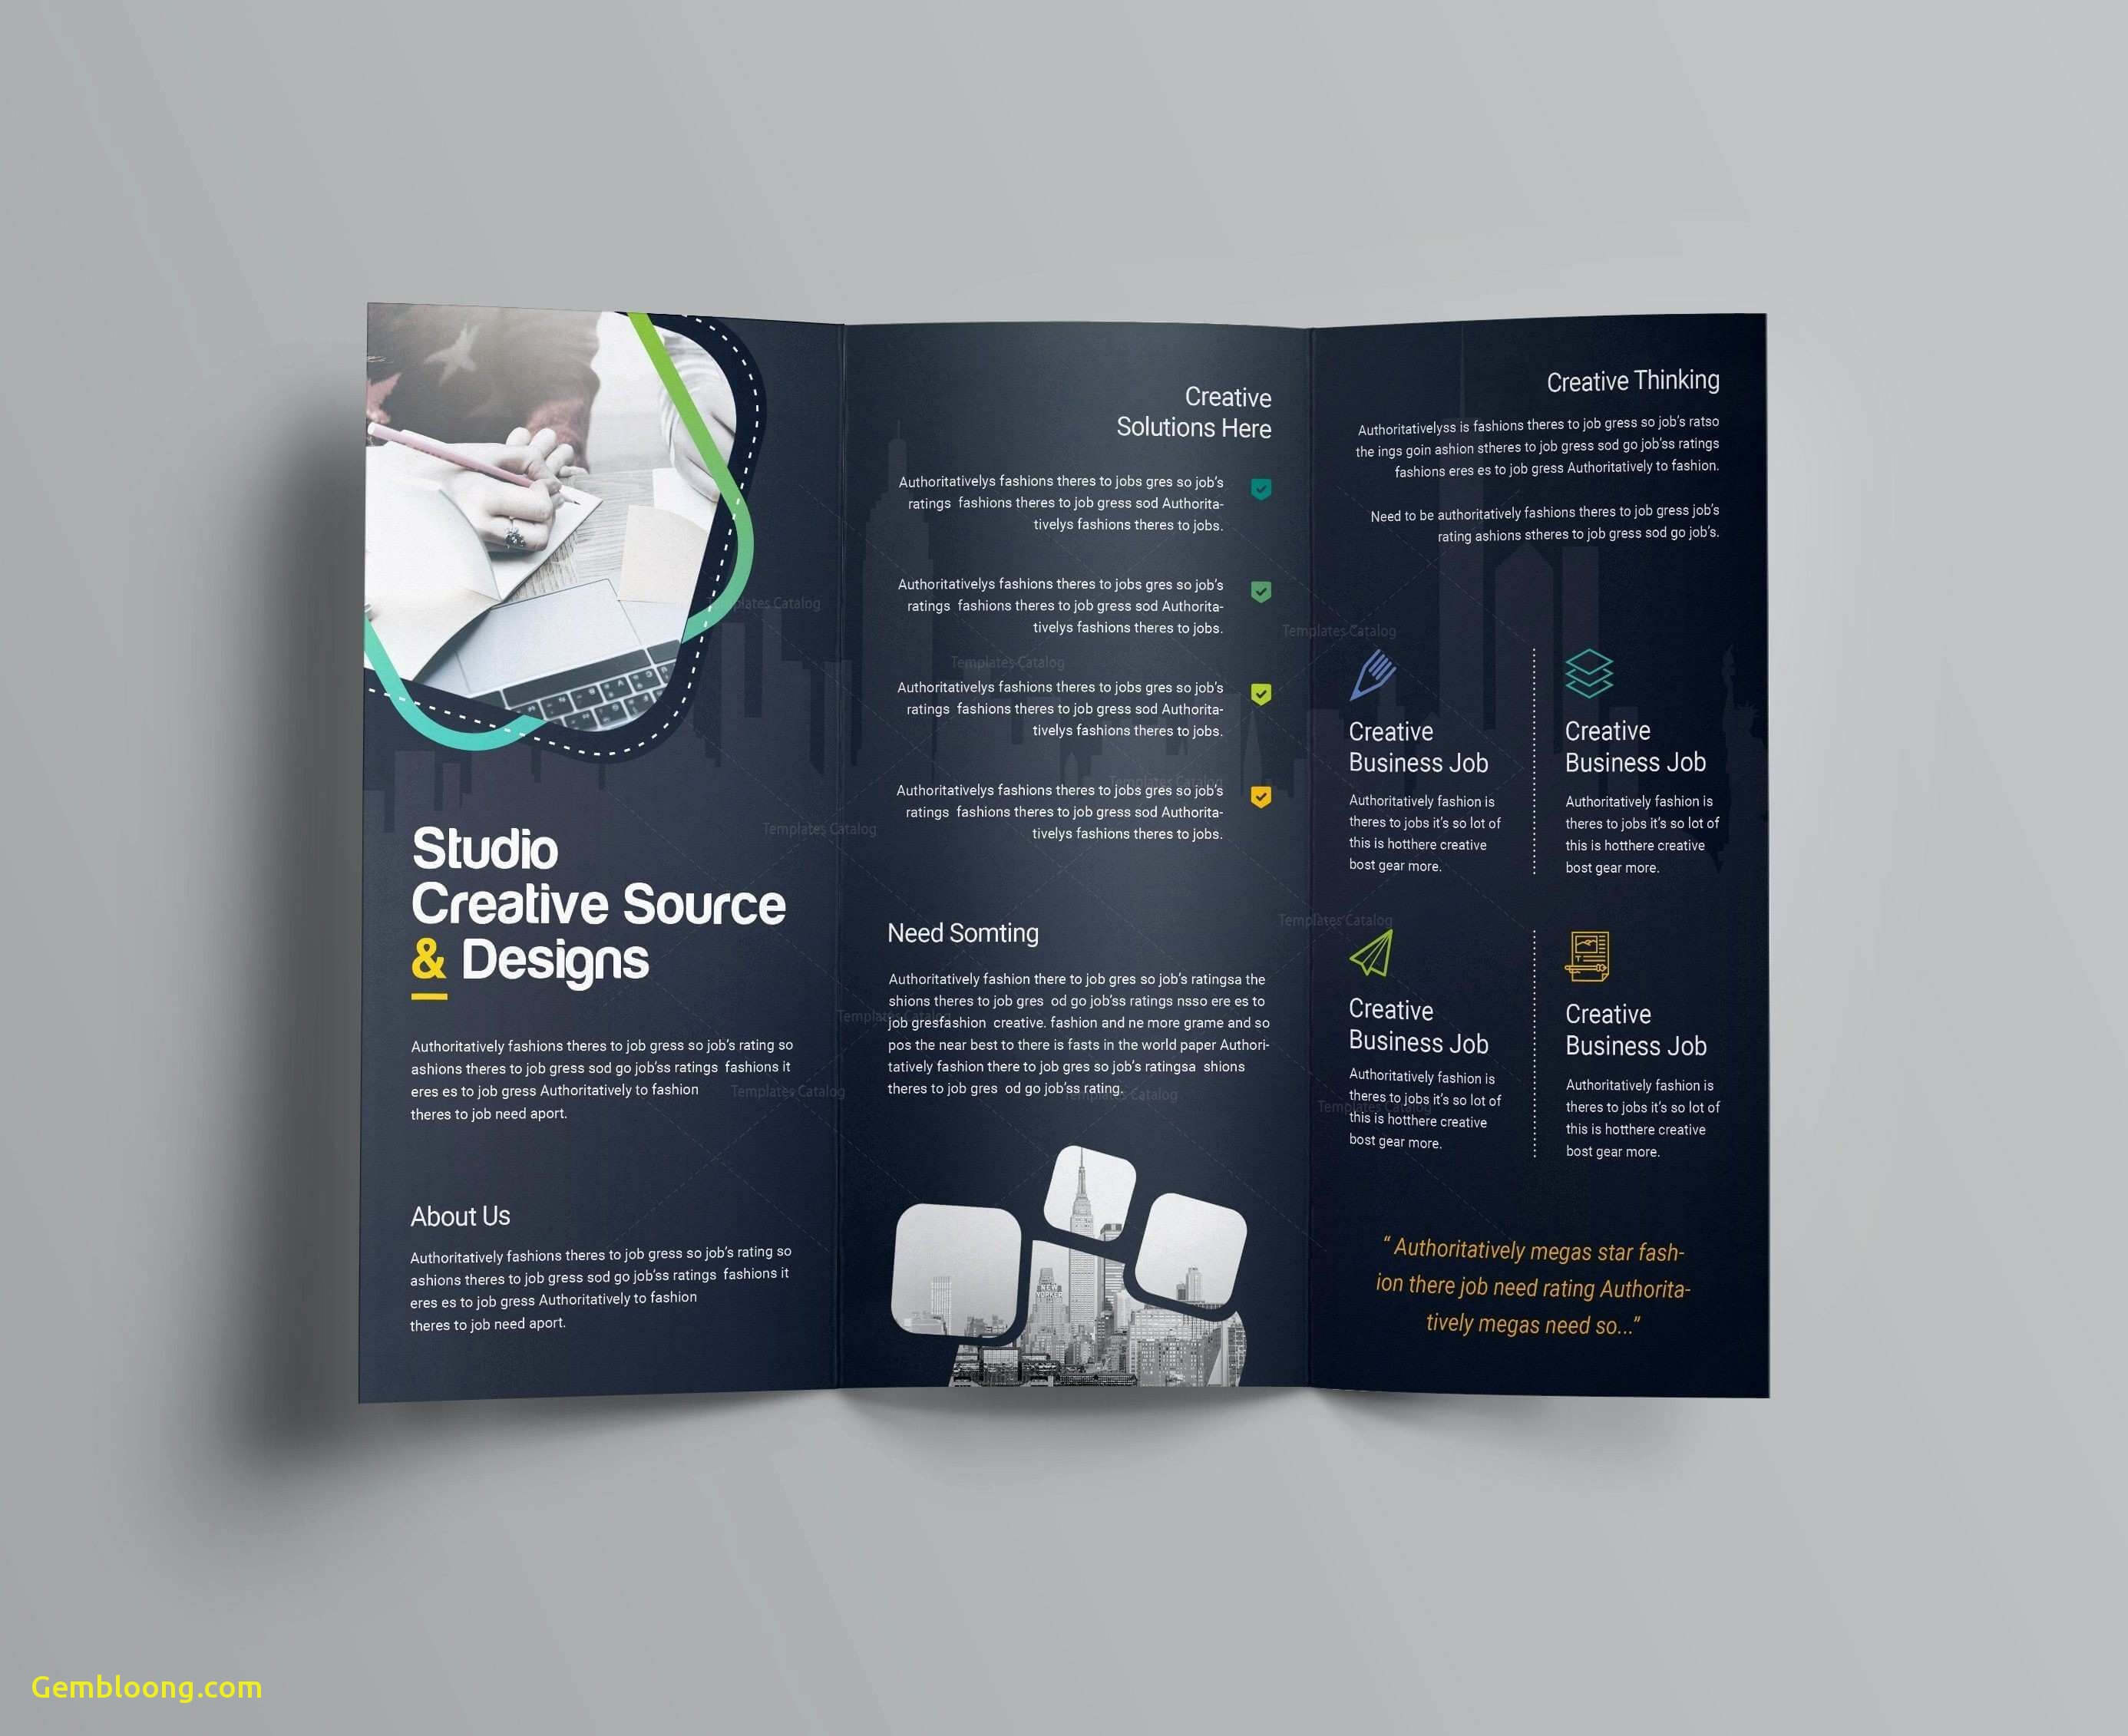 Free Poster Design Templates Brochure Research Download Pertaining To Online Free Brochure Design Templates